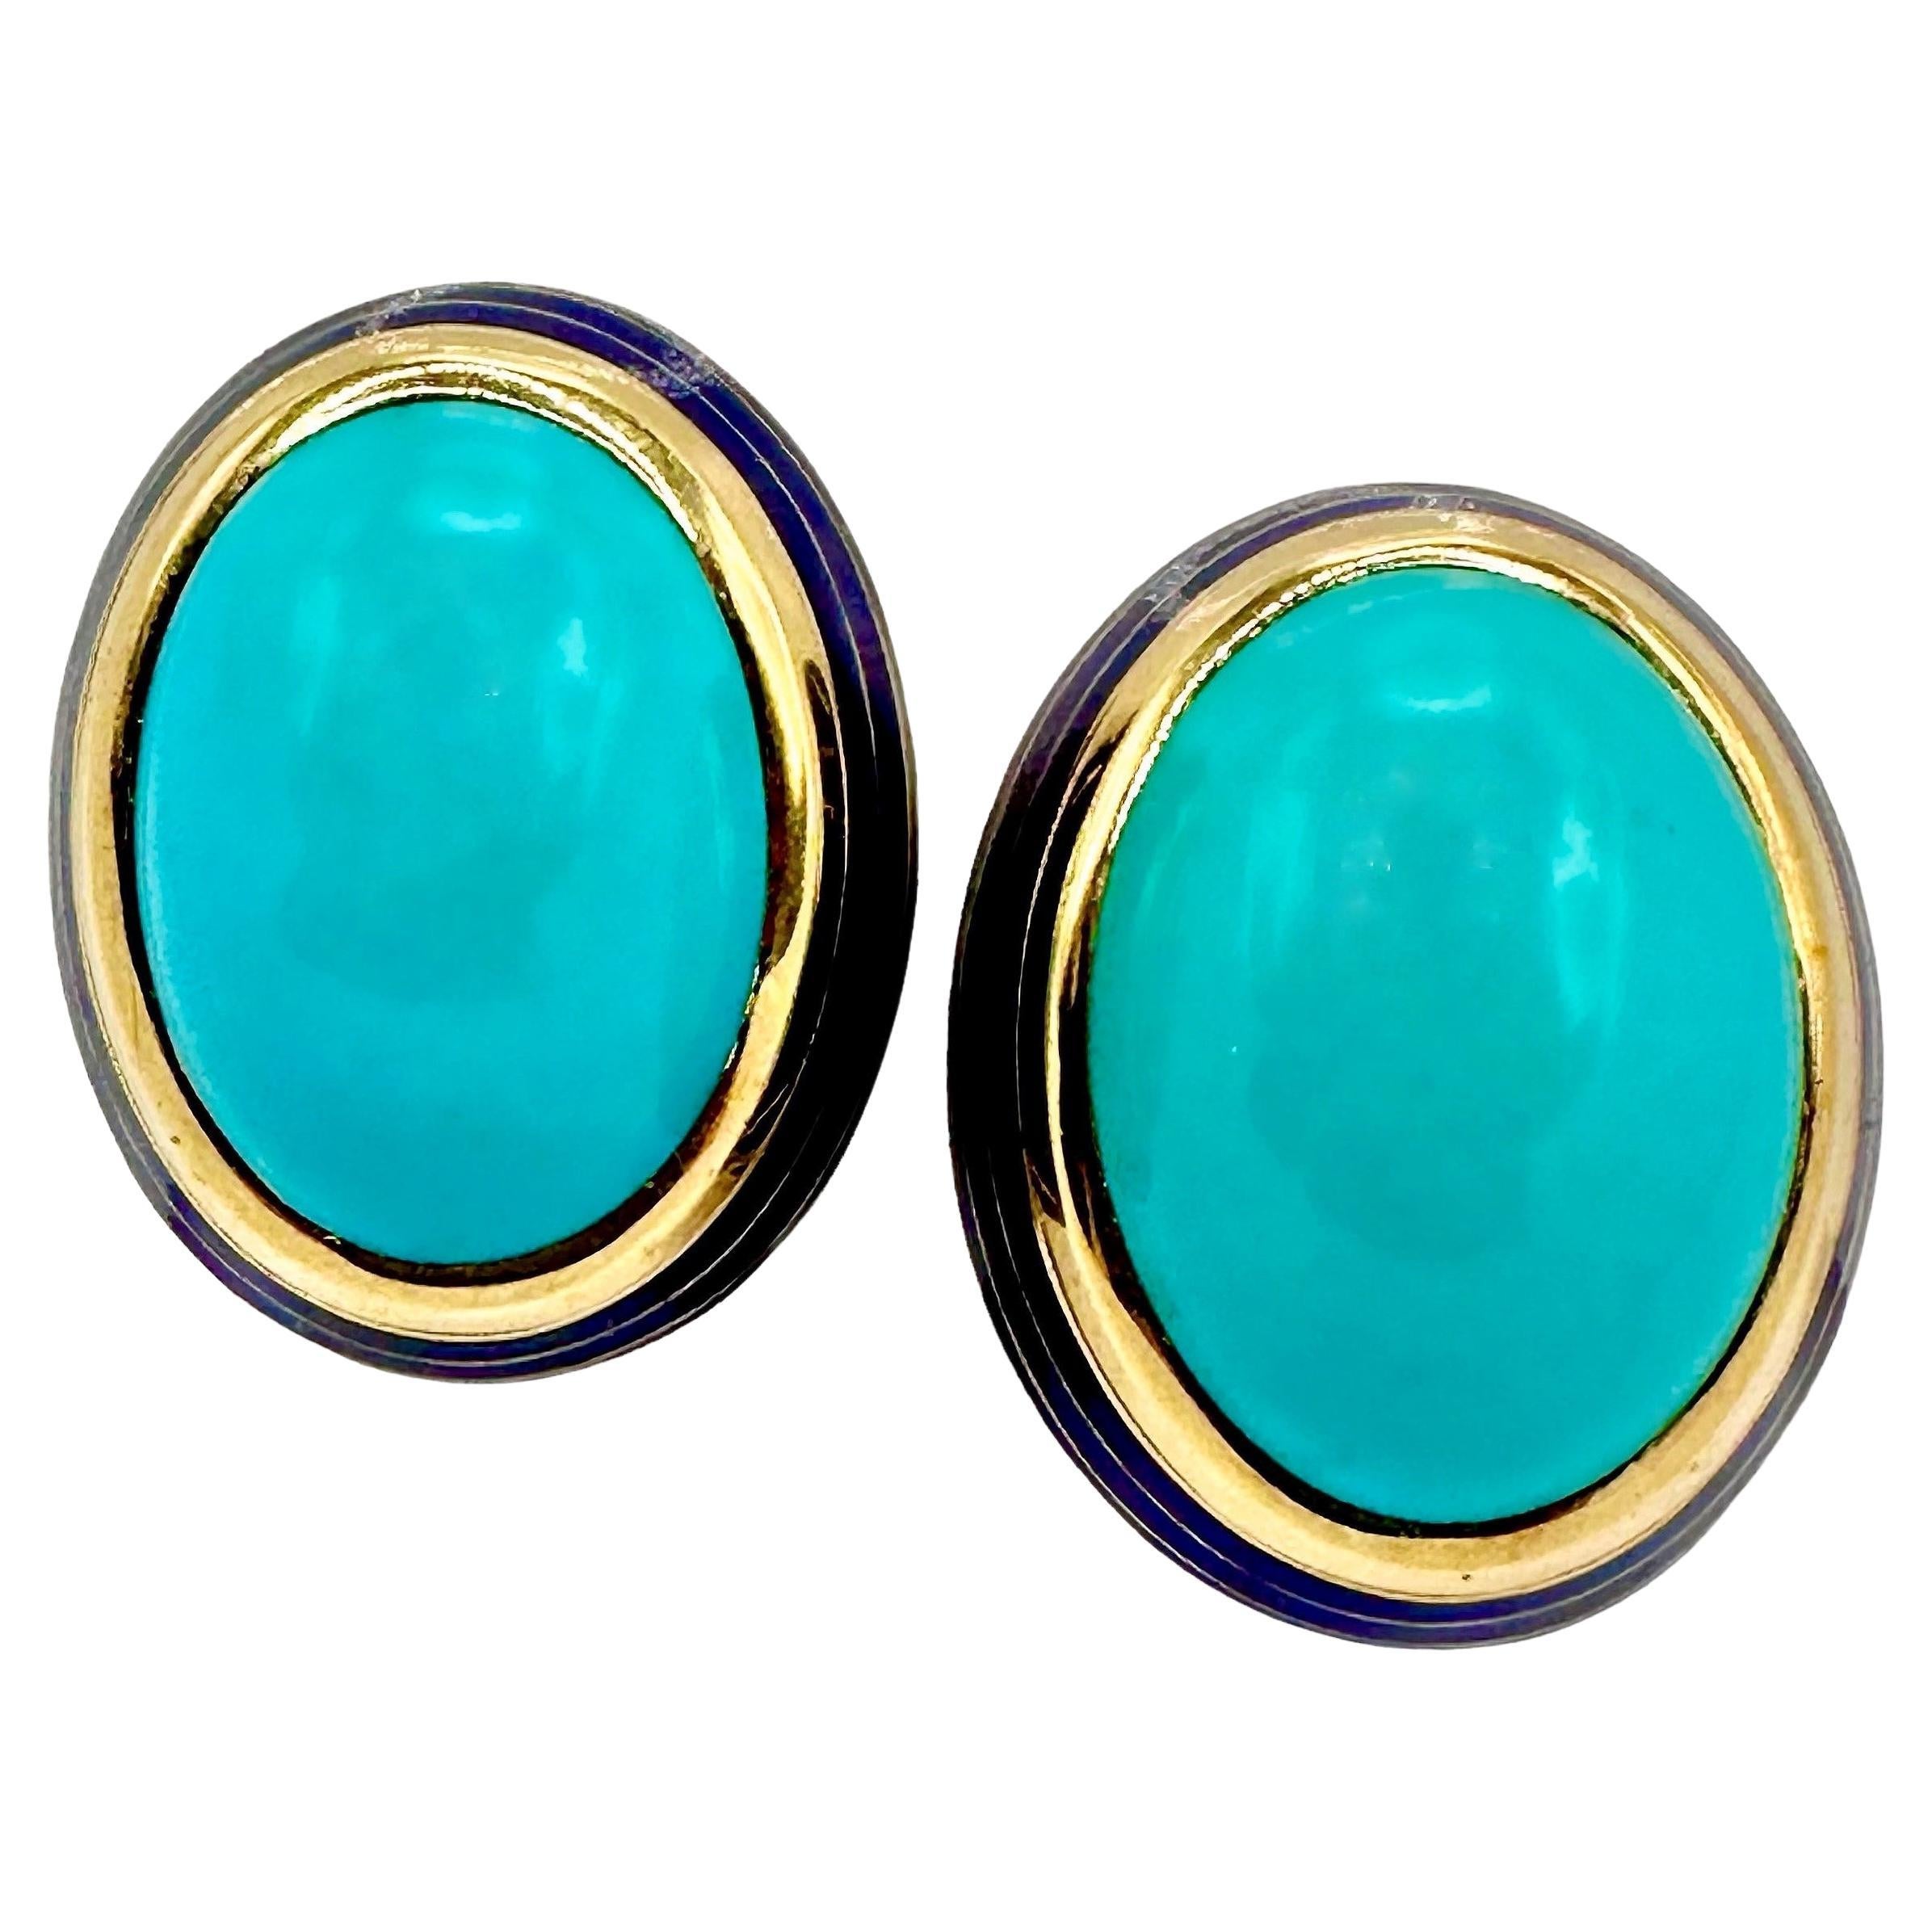 Tailored, Mid-20th Century 18K Yellow Gold, Turquoise and Blue Enamel Earrings For Sale